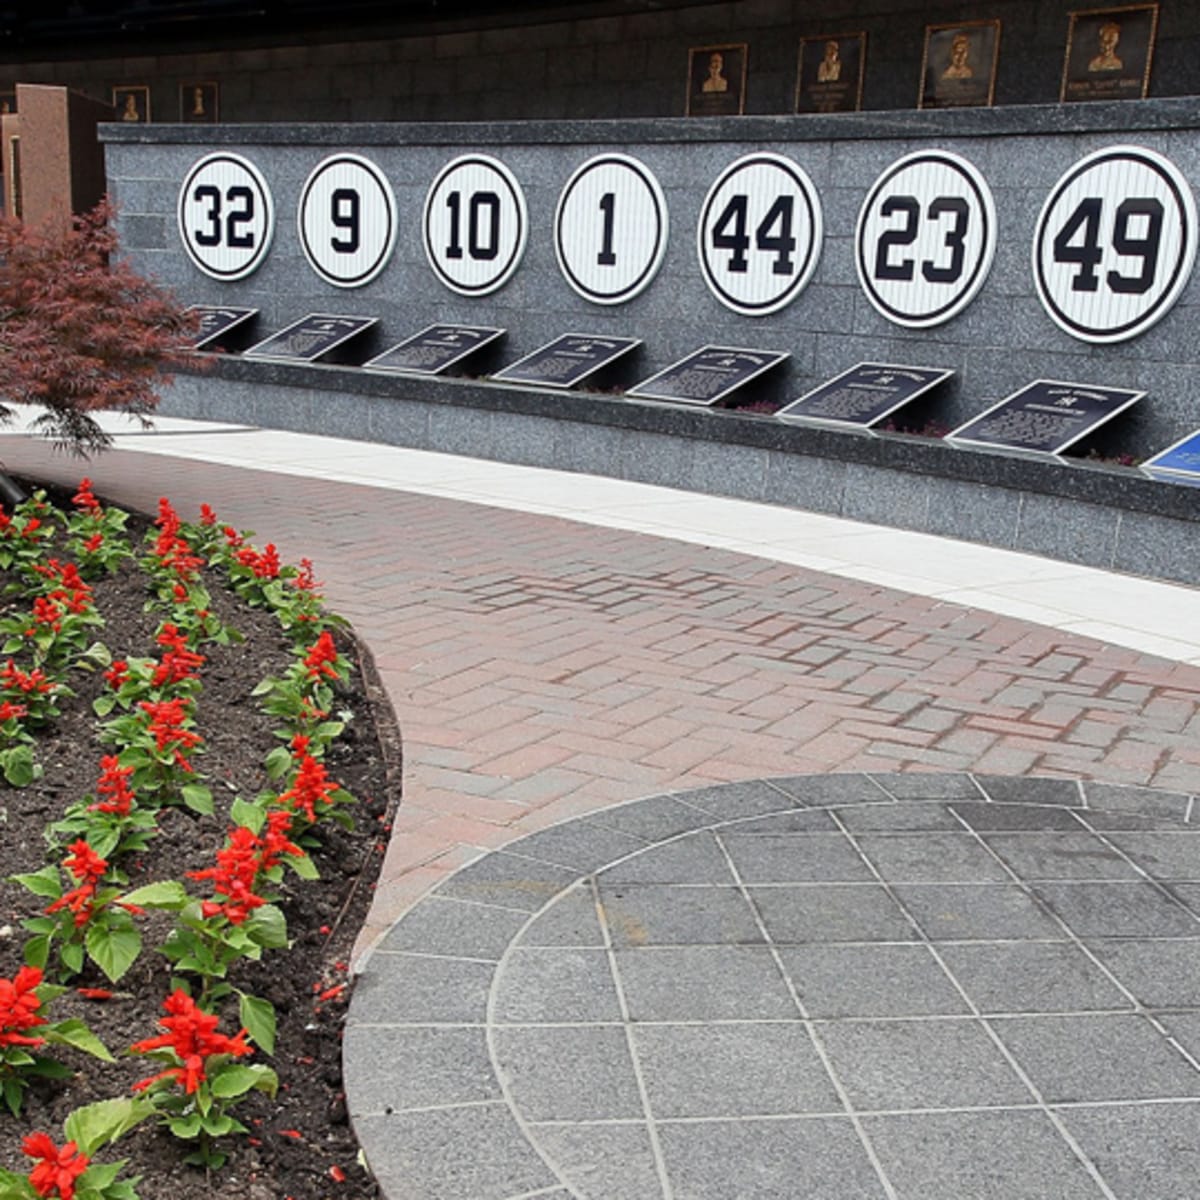 Retired Numbers In Monument Park At Yankee Stadium